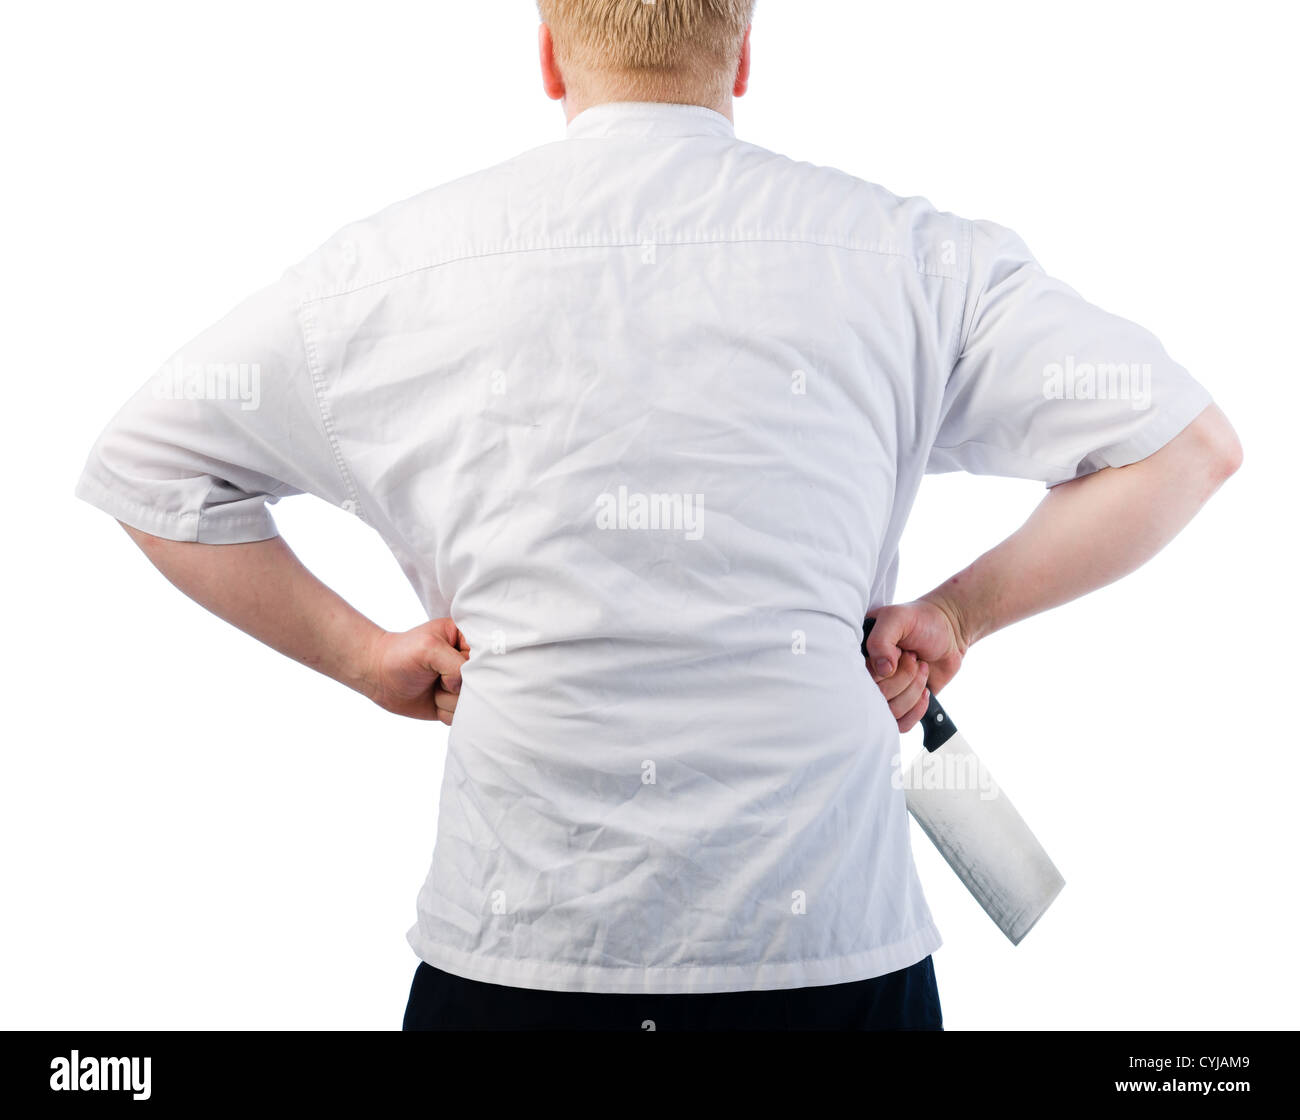 Cook's uniform is wrinkled, white isolated background Stock Photo